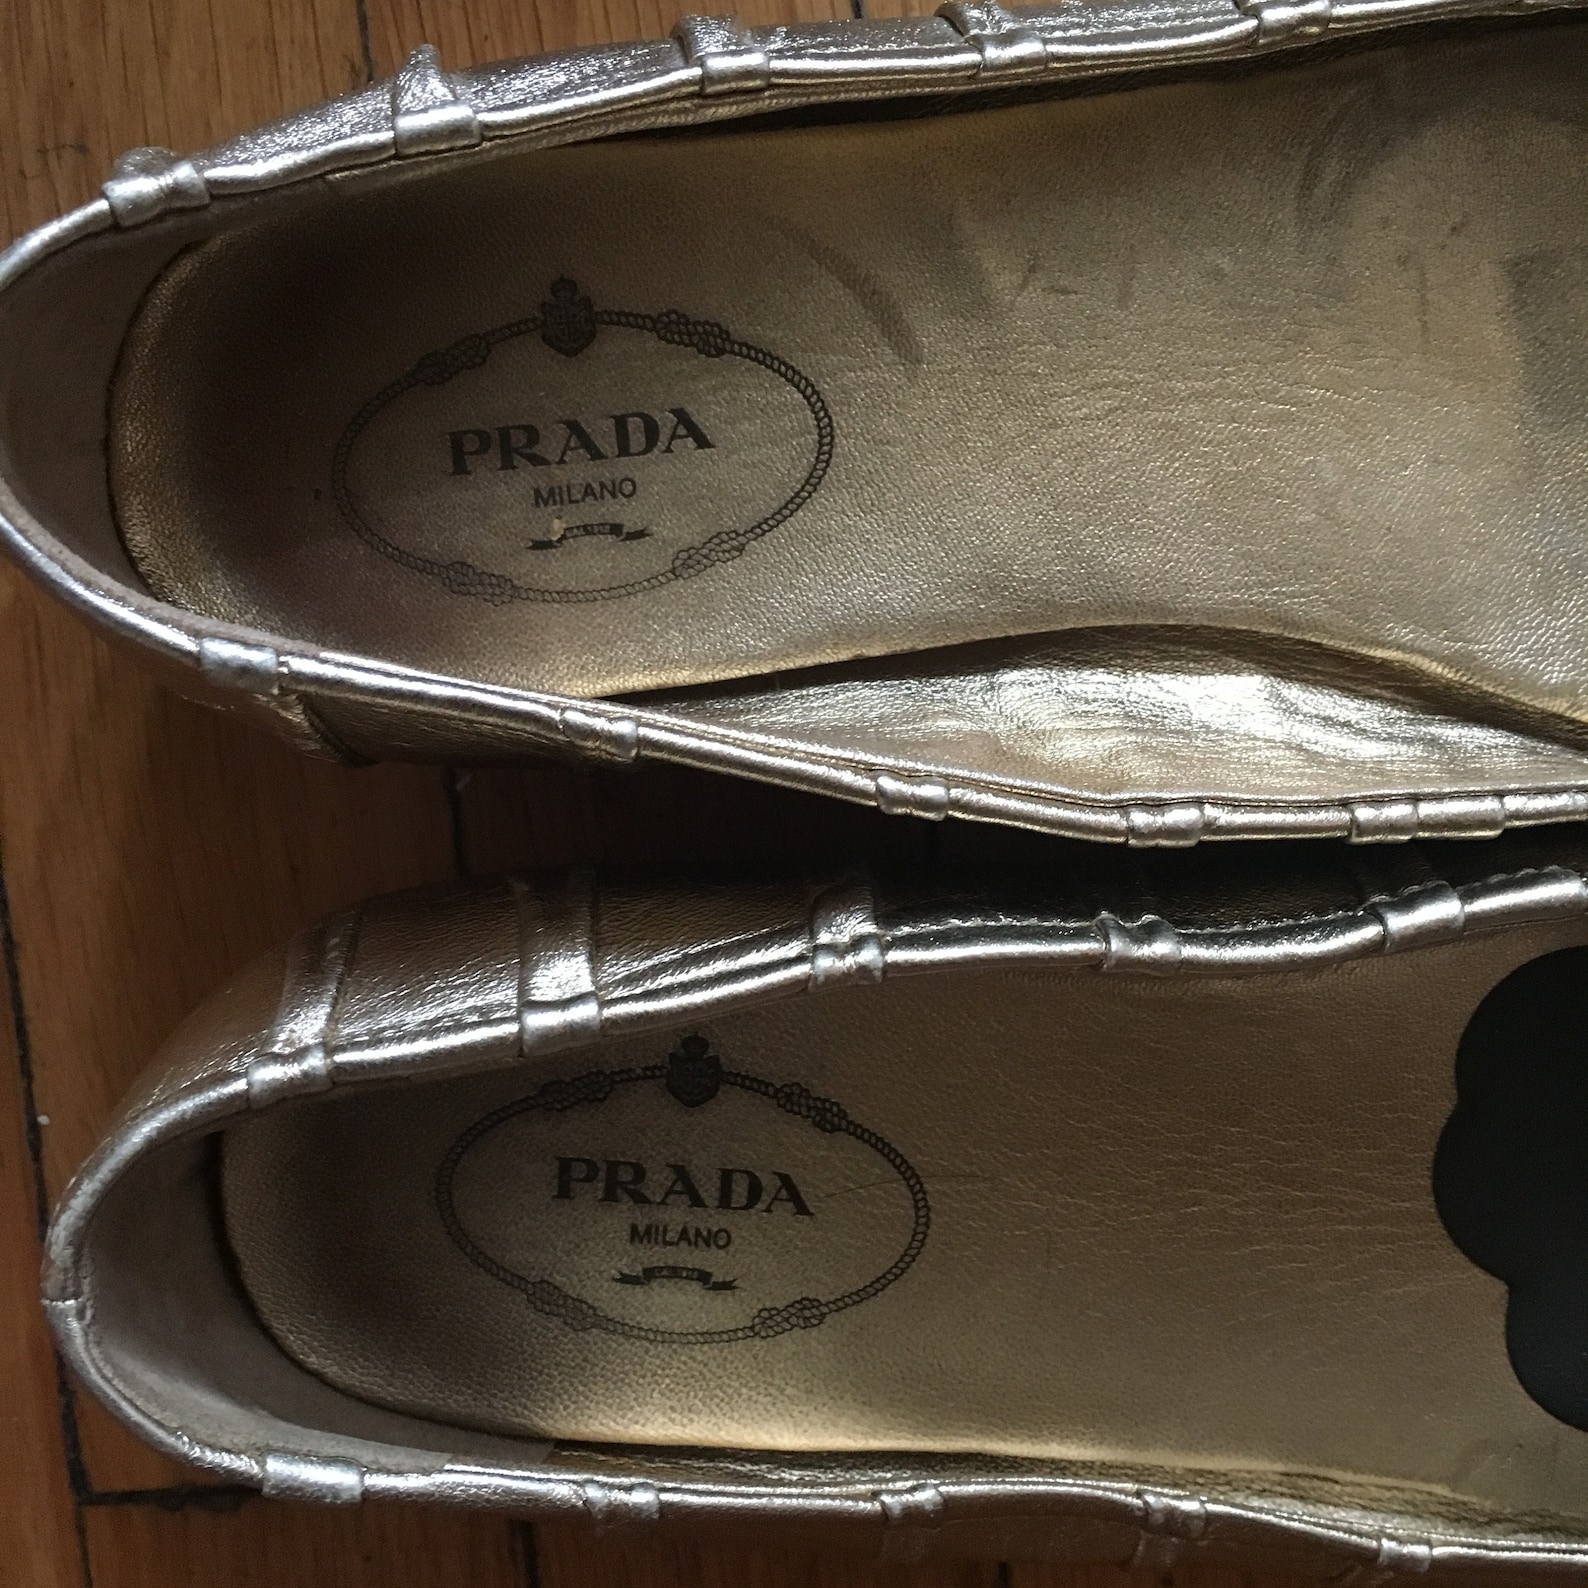 prada 100% authentic leather gold ballet shoes 8.5